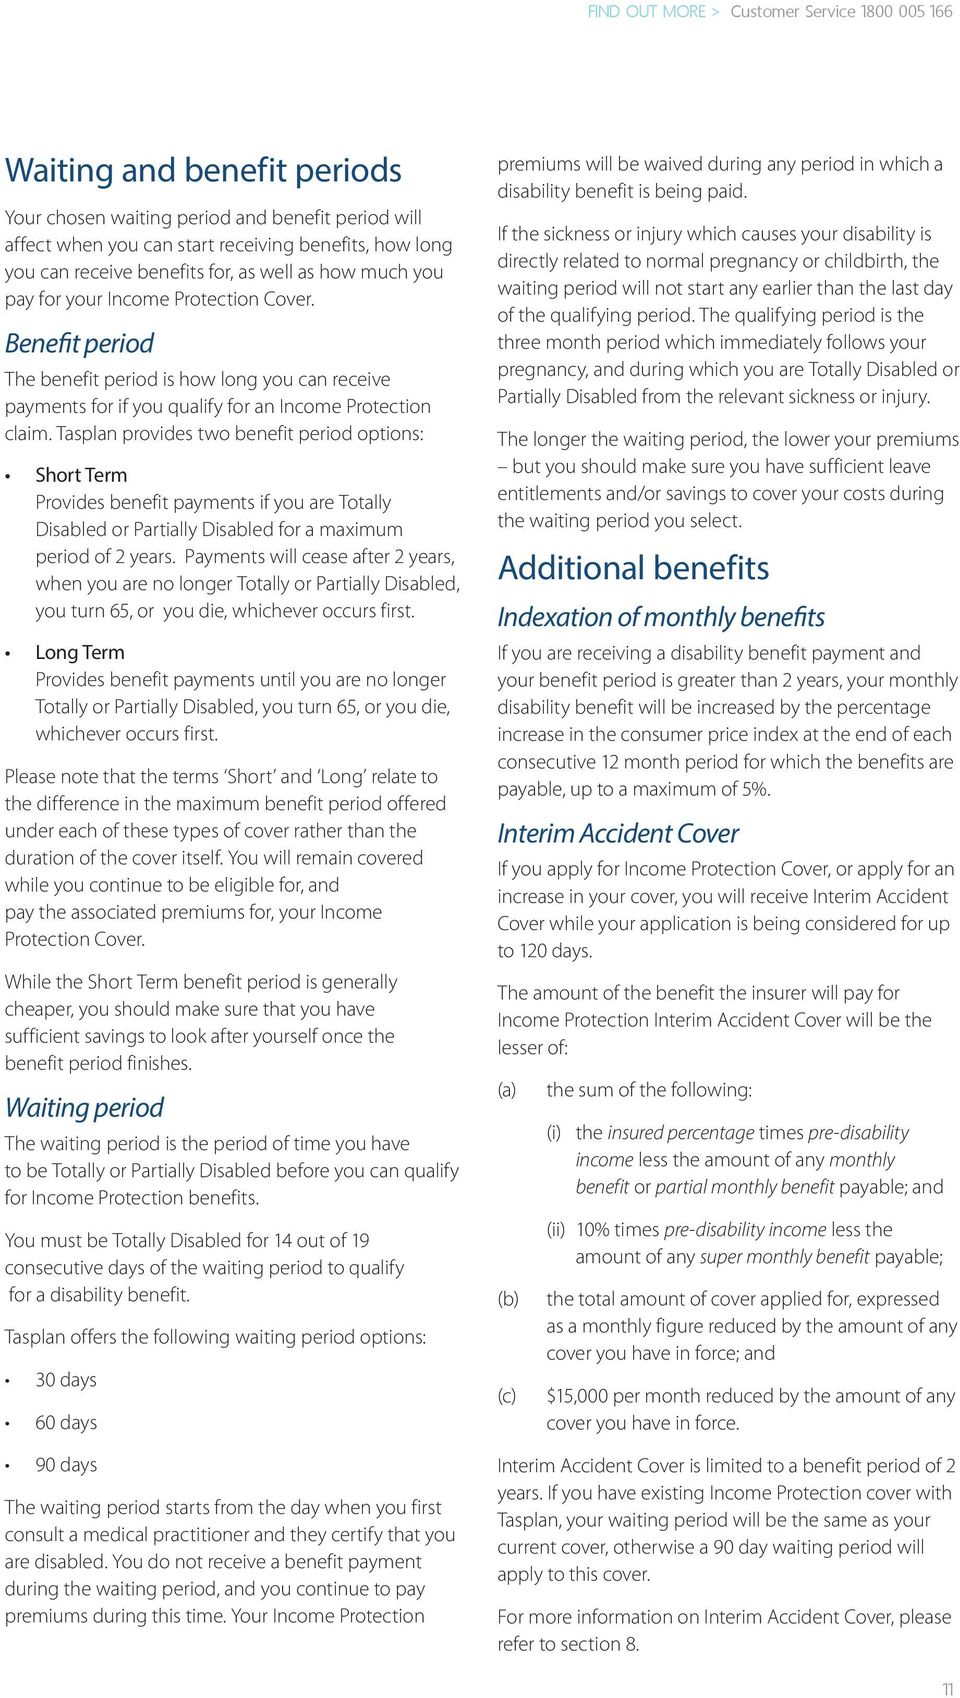 Tasplan provides two benefit period options: Short Term Provides benefit payments if you are Totally Disabled or Partially Disabled for a maximum period of 2 years.